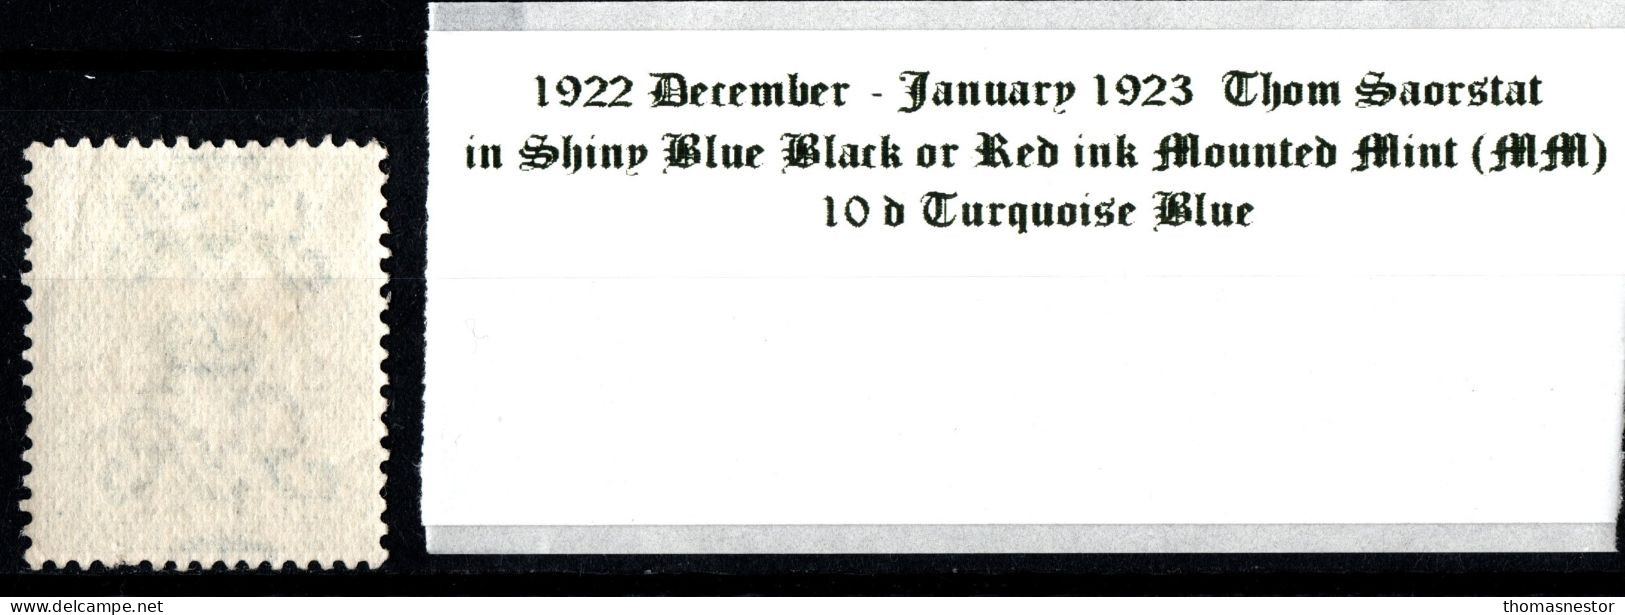 1922 - 1923 December-January Thom Saorstát In Shiny Blue Black Or Red Ink, 10 D Turquoise Blue, Mounted Mint (MM) - Nuovi